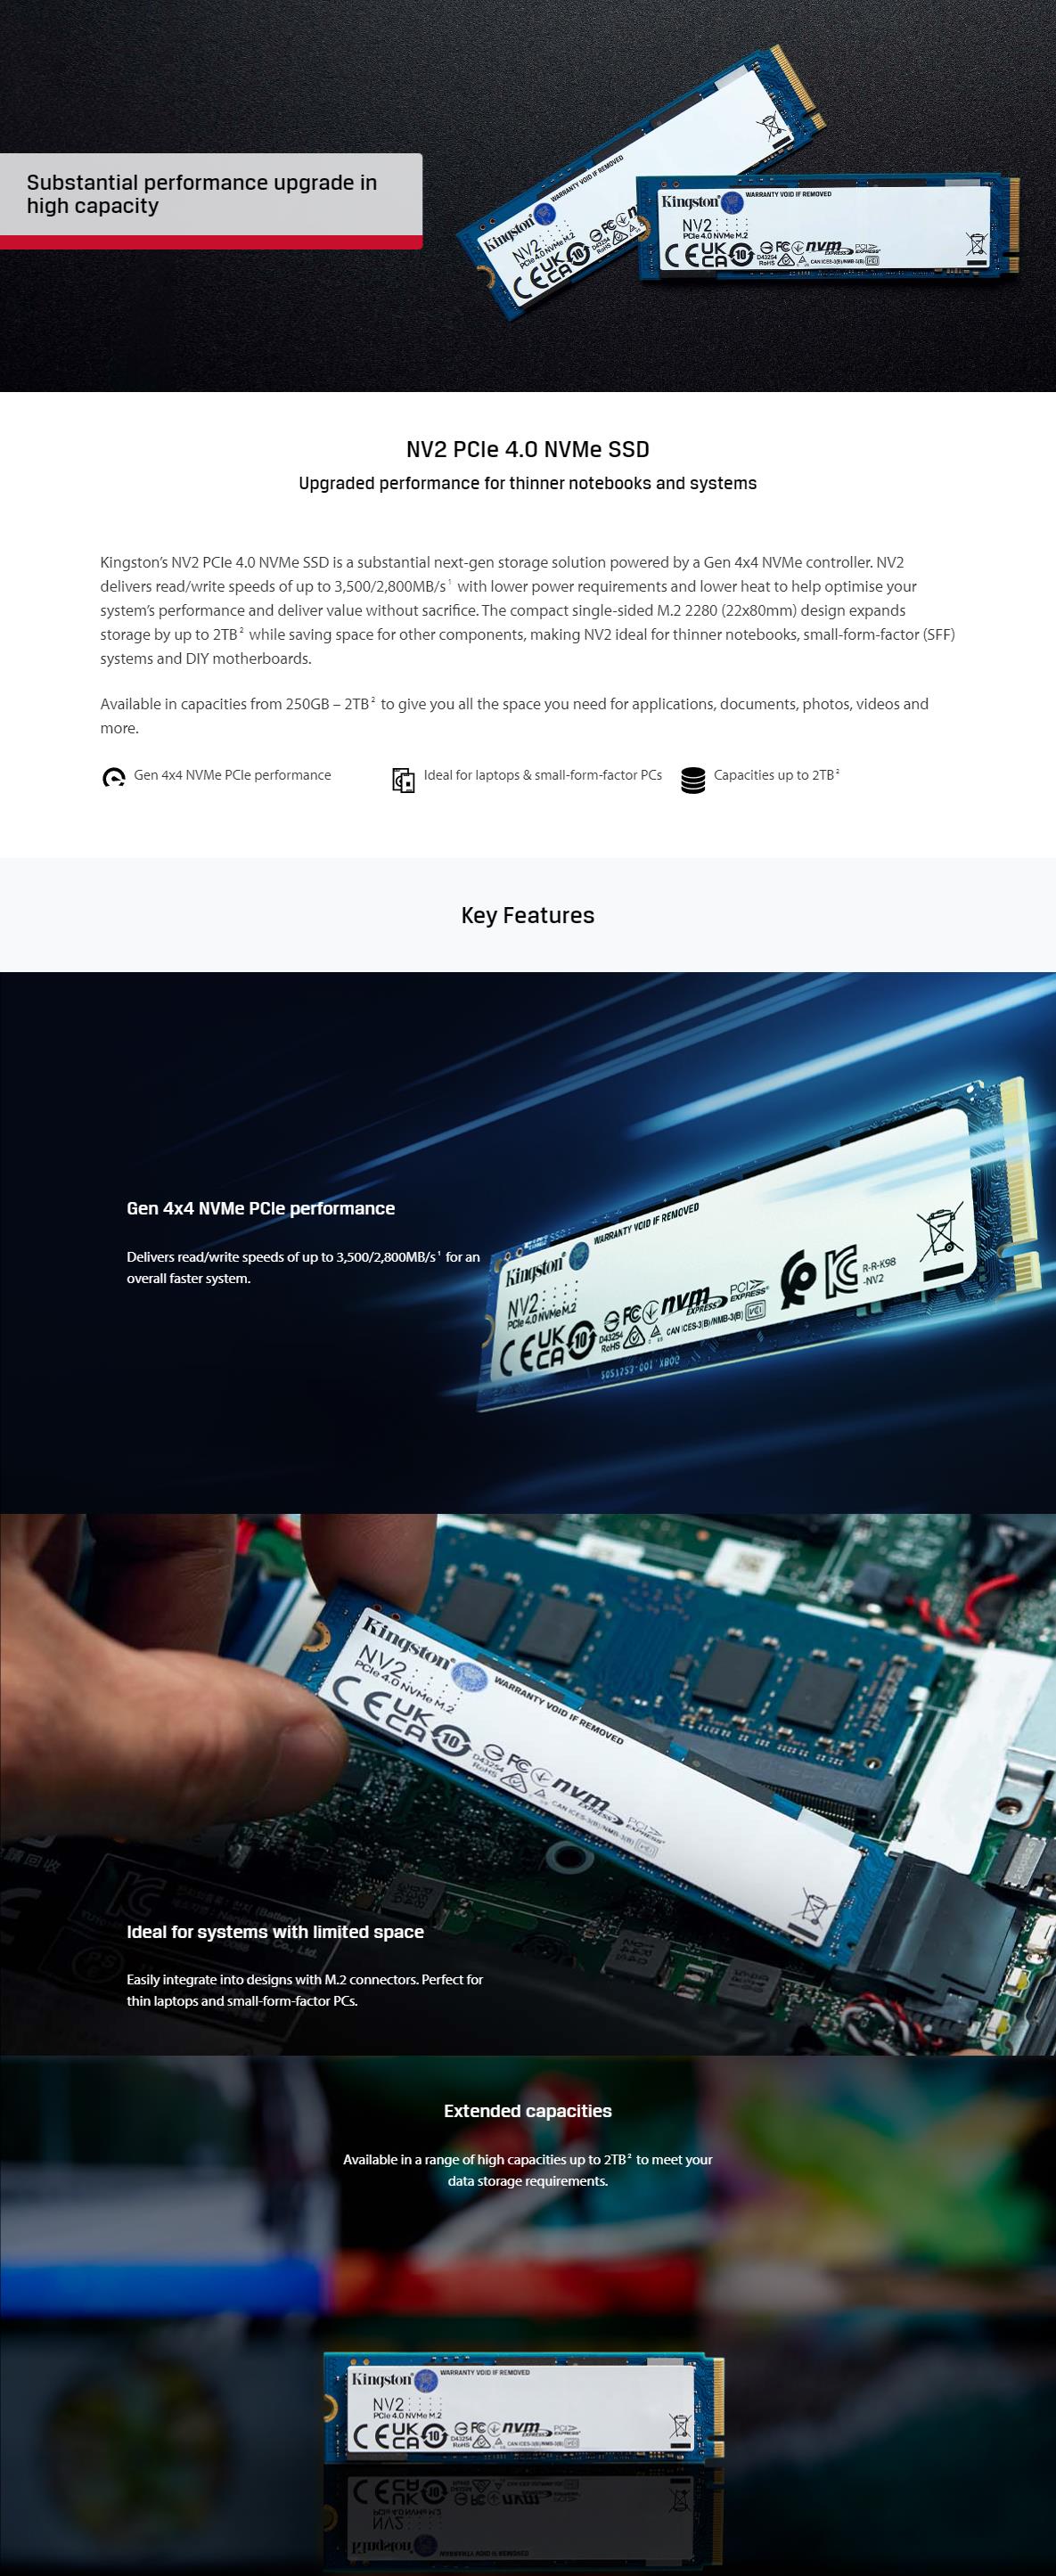 A large marketing image providing additional information about the product Kingston NV2 PCIe Gen4 NVMe M.2 SSD - 500GB - Additional alt info not provided